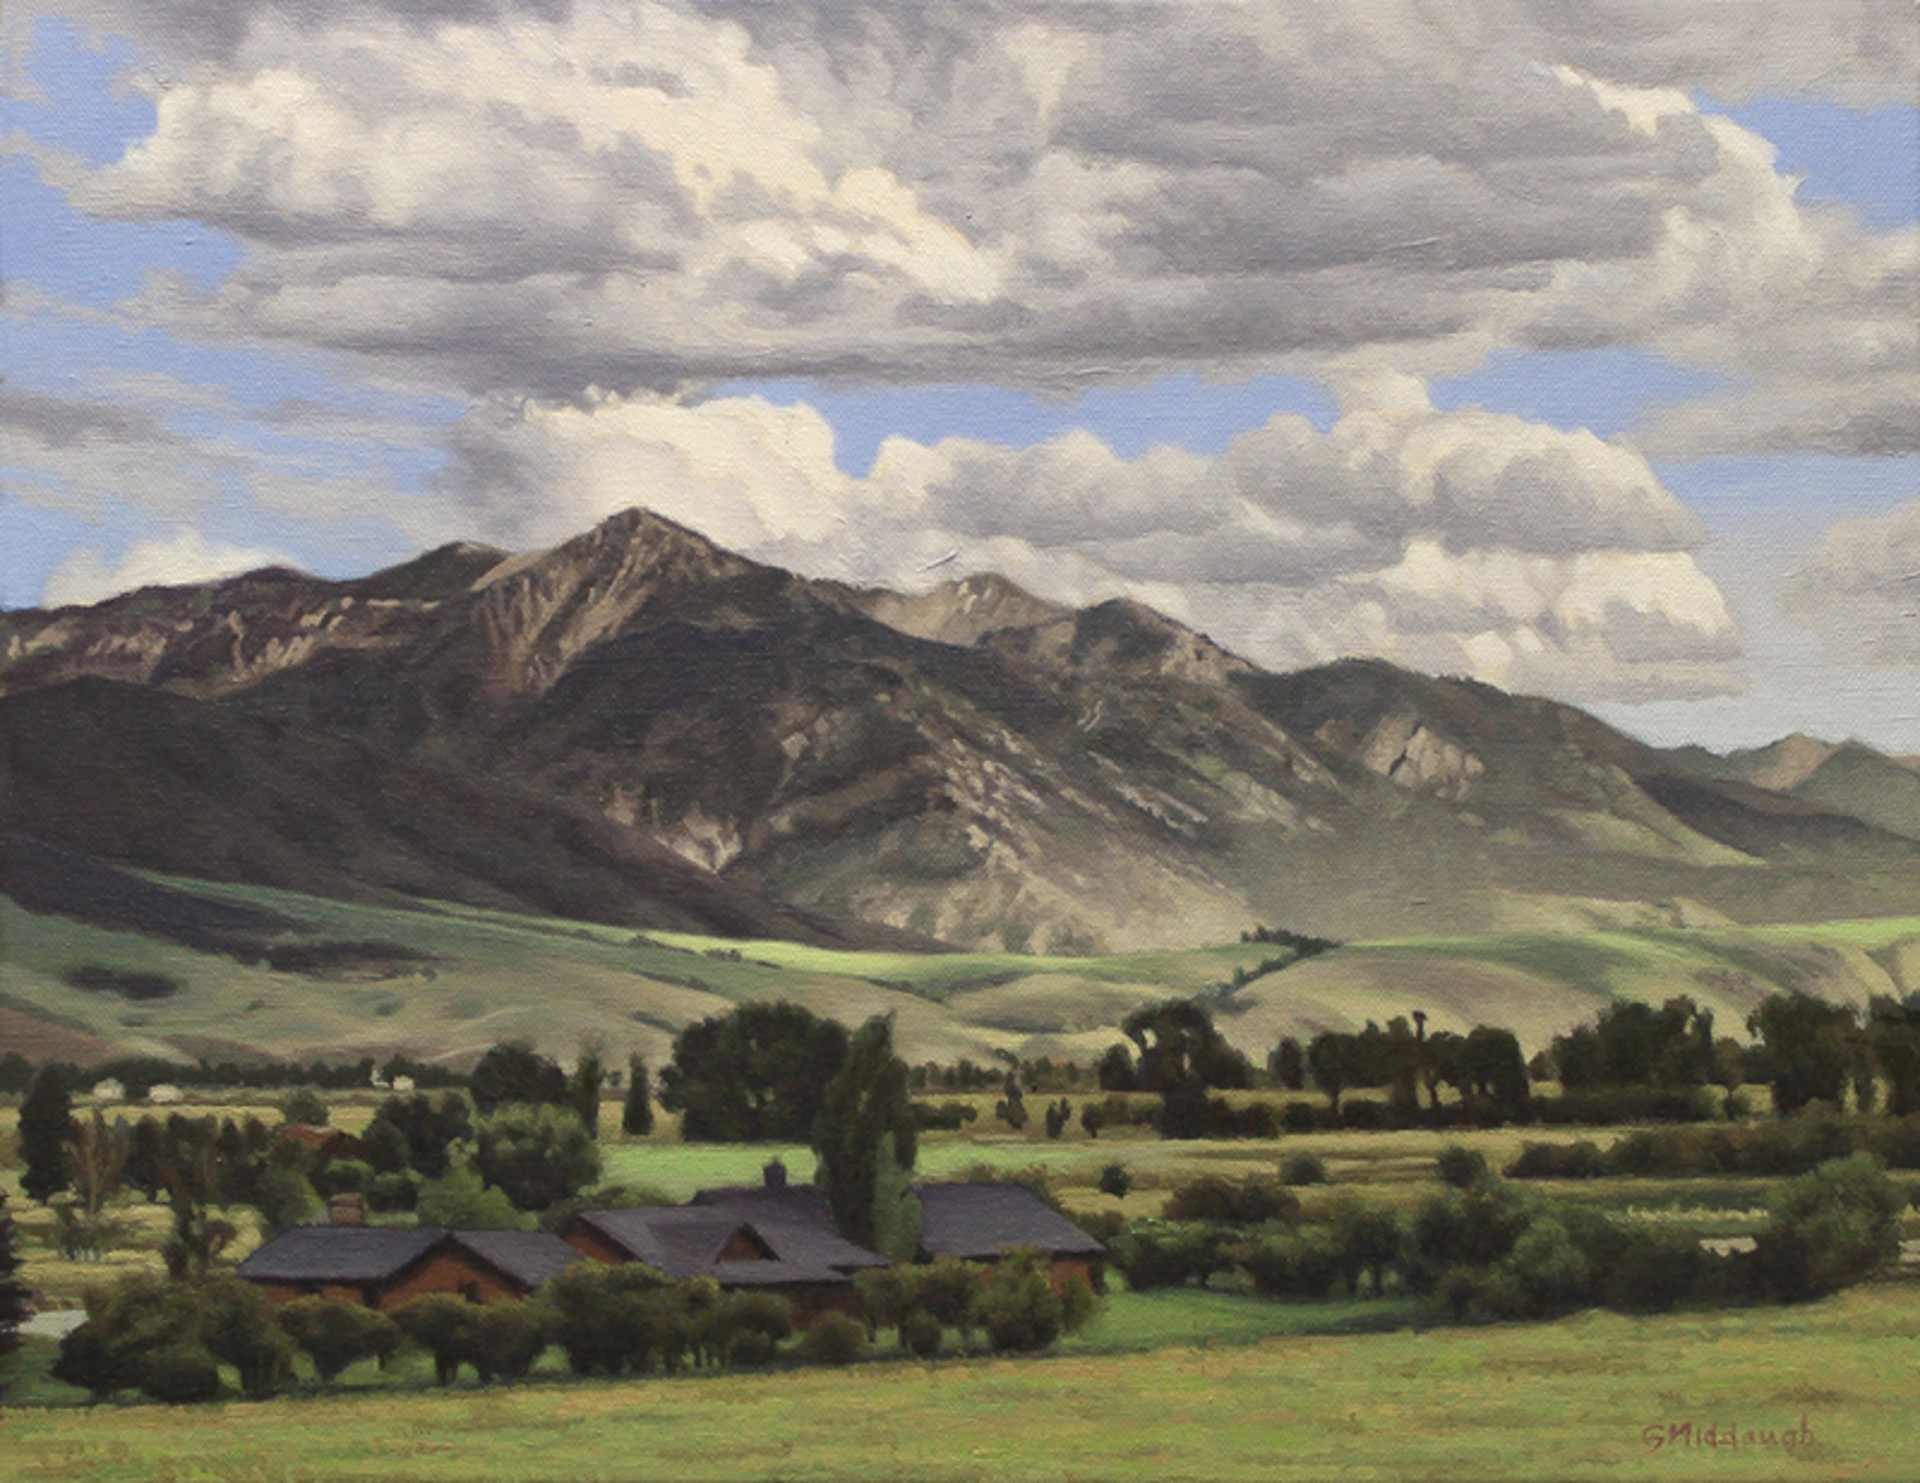 Homestead by the Snake River by Garrett Middaugh